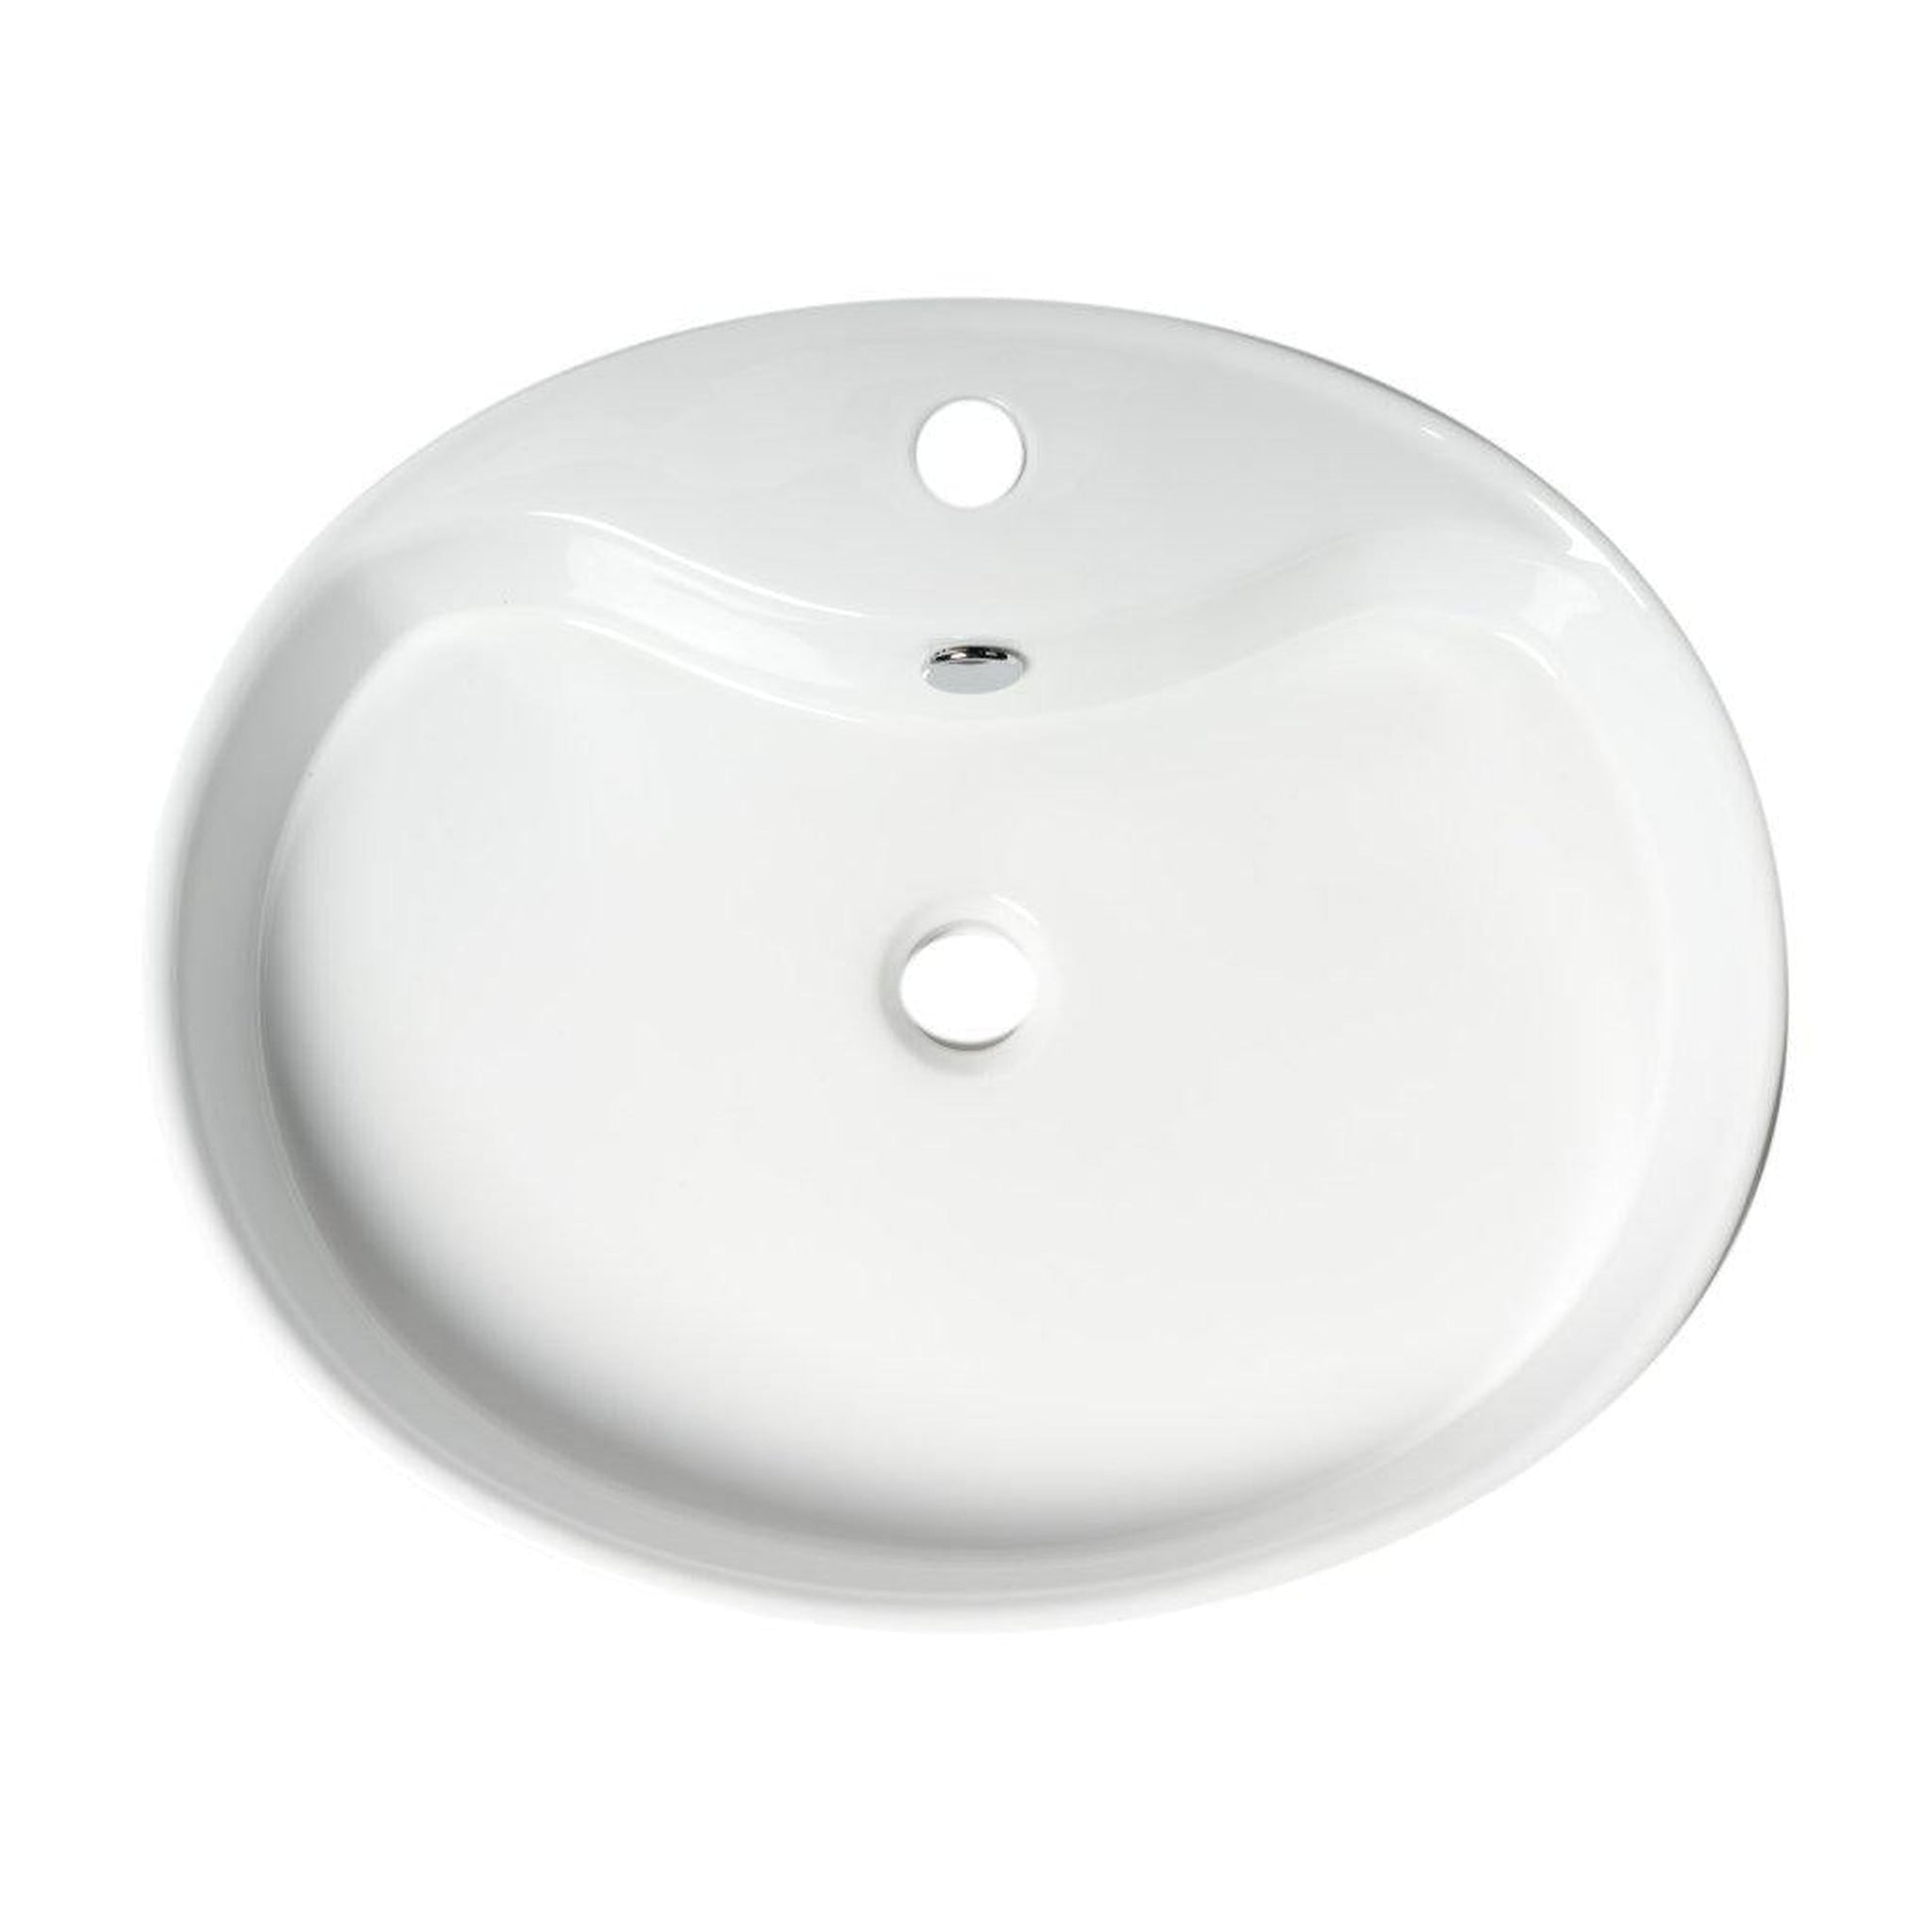 ALFI Brand ABC910 22" White Above Mount Oval Ceramic Bathroom Sink With Single Faucet Hole and Overflow